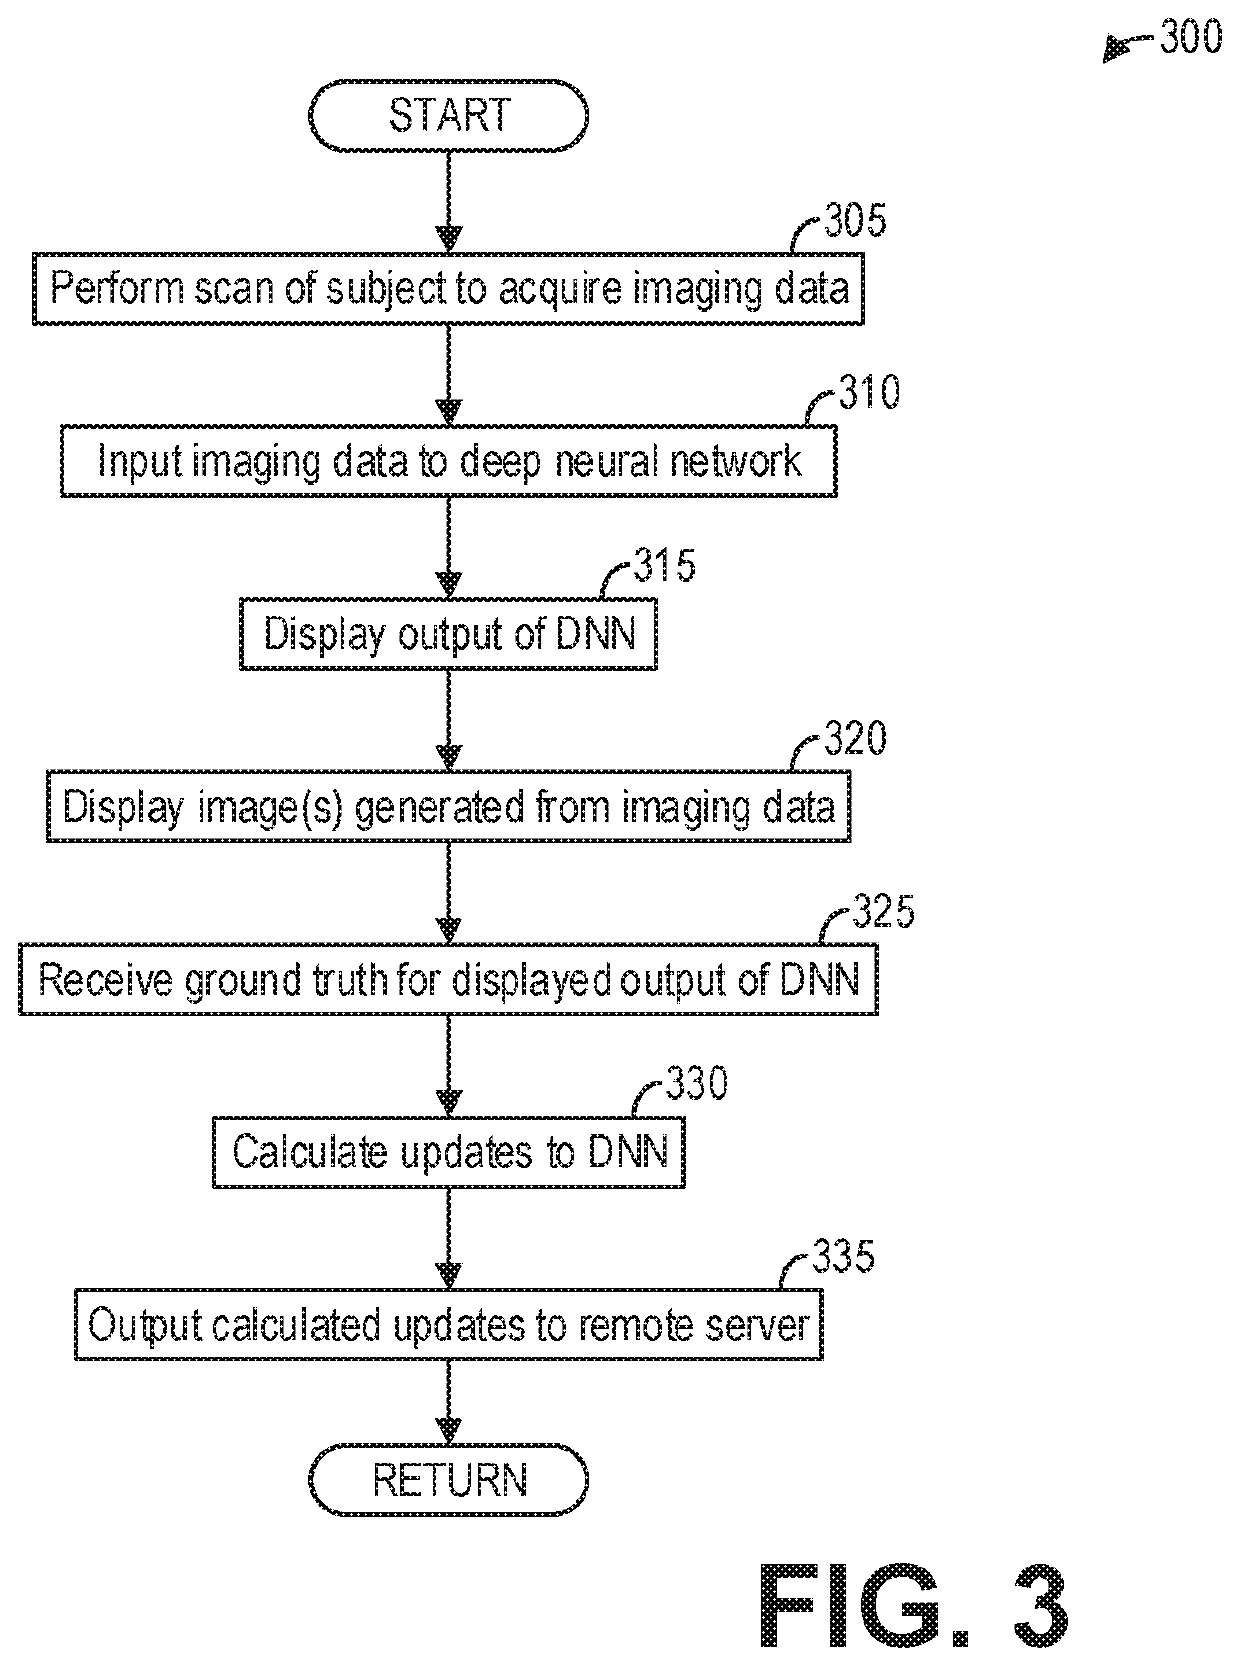 Systems and methods for capturing deep learning training data from imaging systems